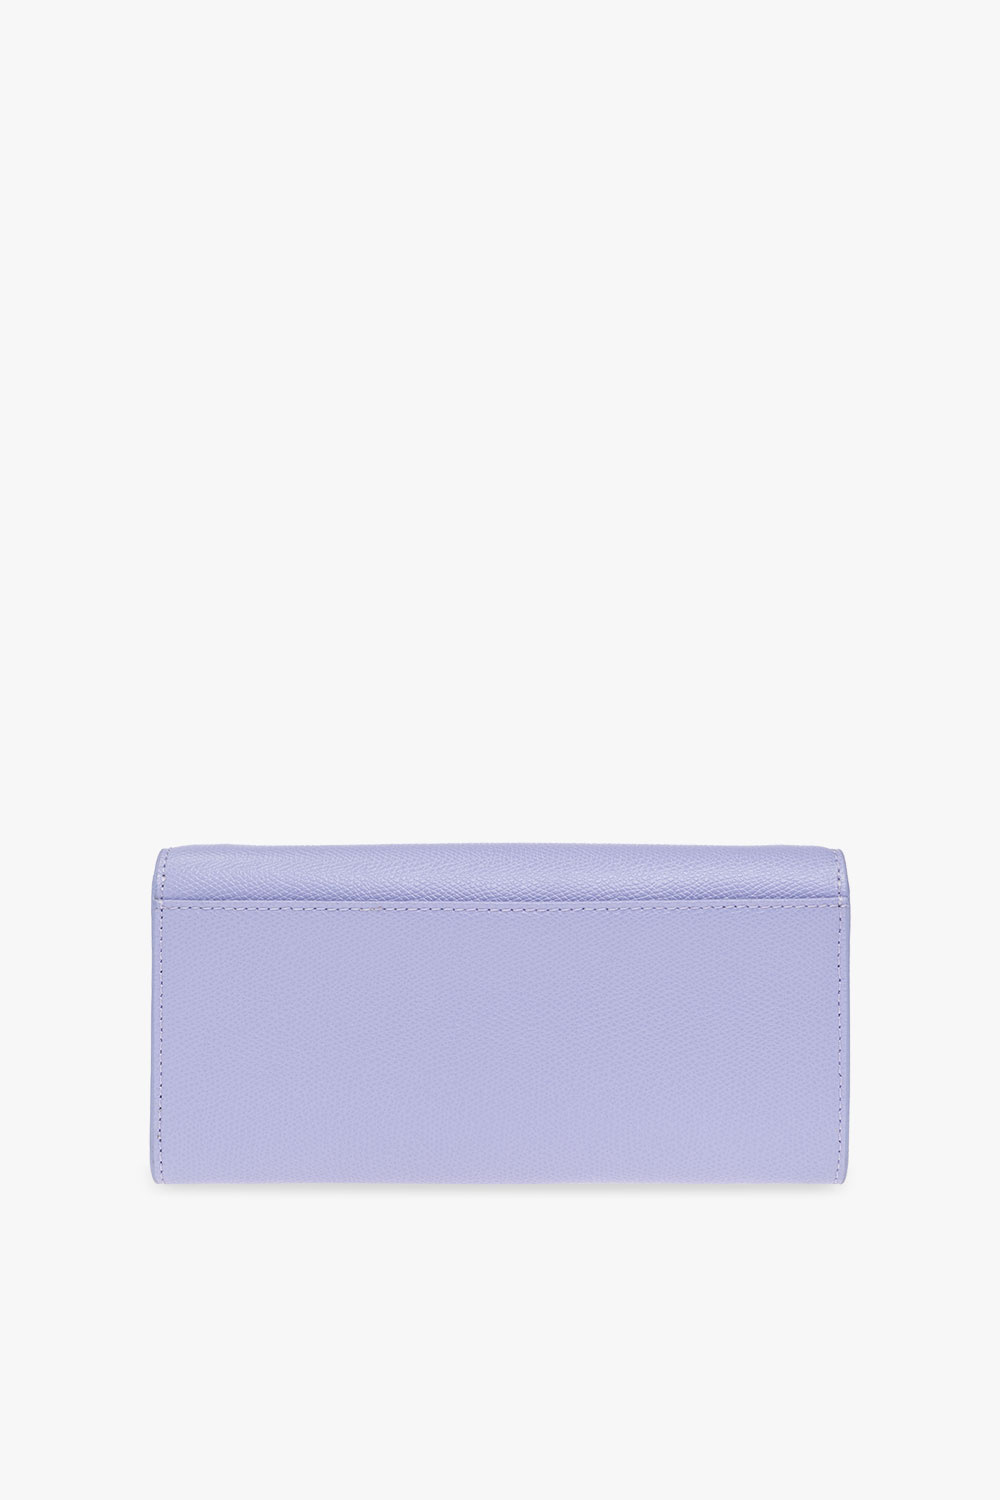 Furla ‘1927’ wallet with chain